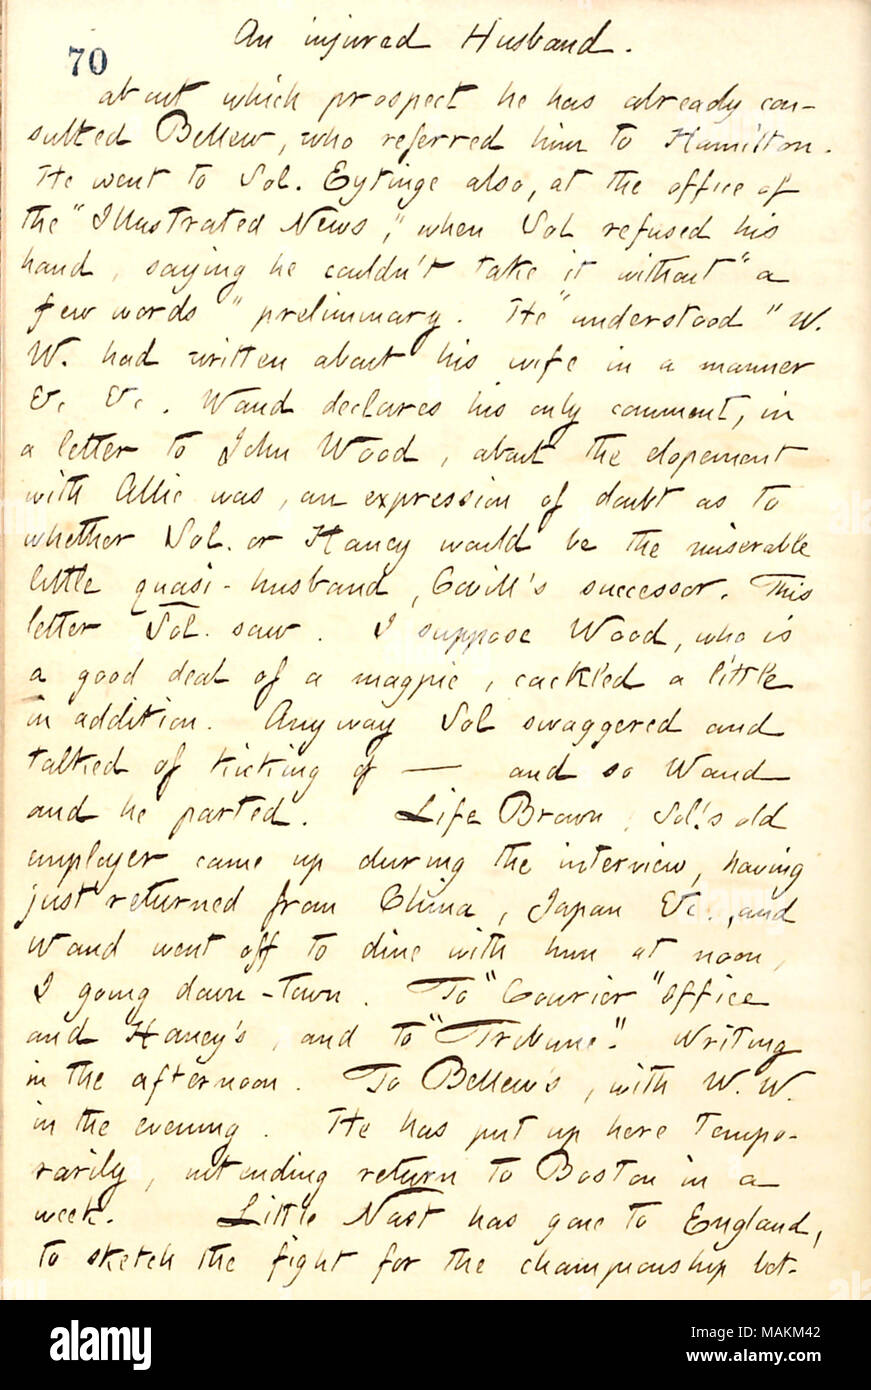 Regarding the arrival of William Waud in New York.  Transcription: An injured Husband. about which prospect he [William Waud] has already consulted [Frank] Bellew, who referred him to Hamilton. He went to Sol. Eytinge also, at the office of the 'Illustrated News,' when Sol refused his hand, saying he couldn't take it without 'a few words' preliminary. He 'understood' W.W. had written about his wife [Allie Vernon] in a manner &c &c. Waud declares his only comment, in a letter to John Wood, about the elopement with Allie was, an expression of doubt as to whether Sol or [Jesse] Haney would be the Stock Photo